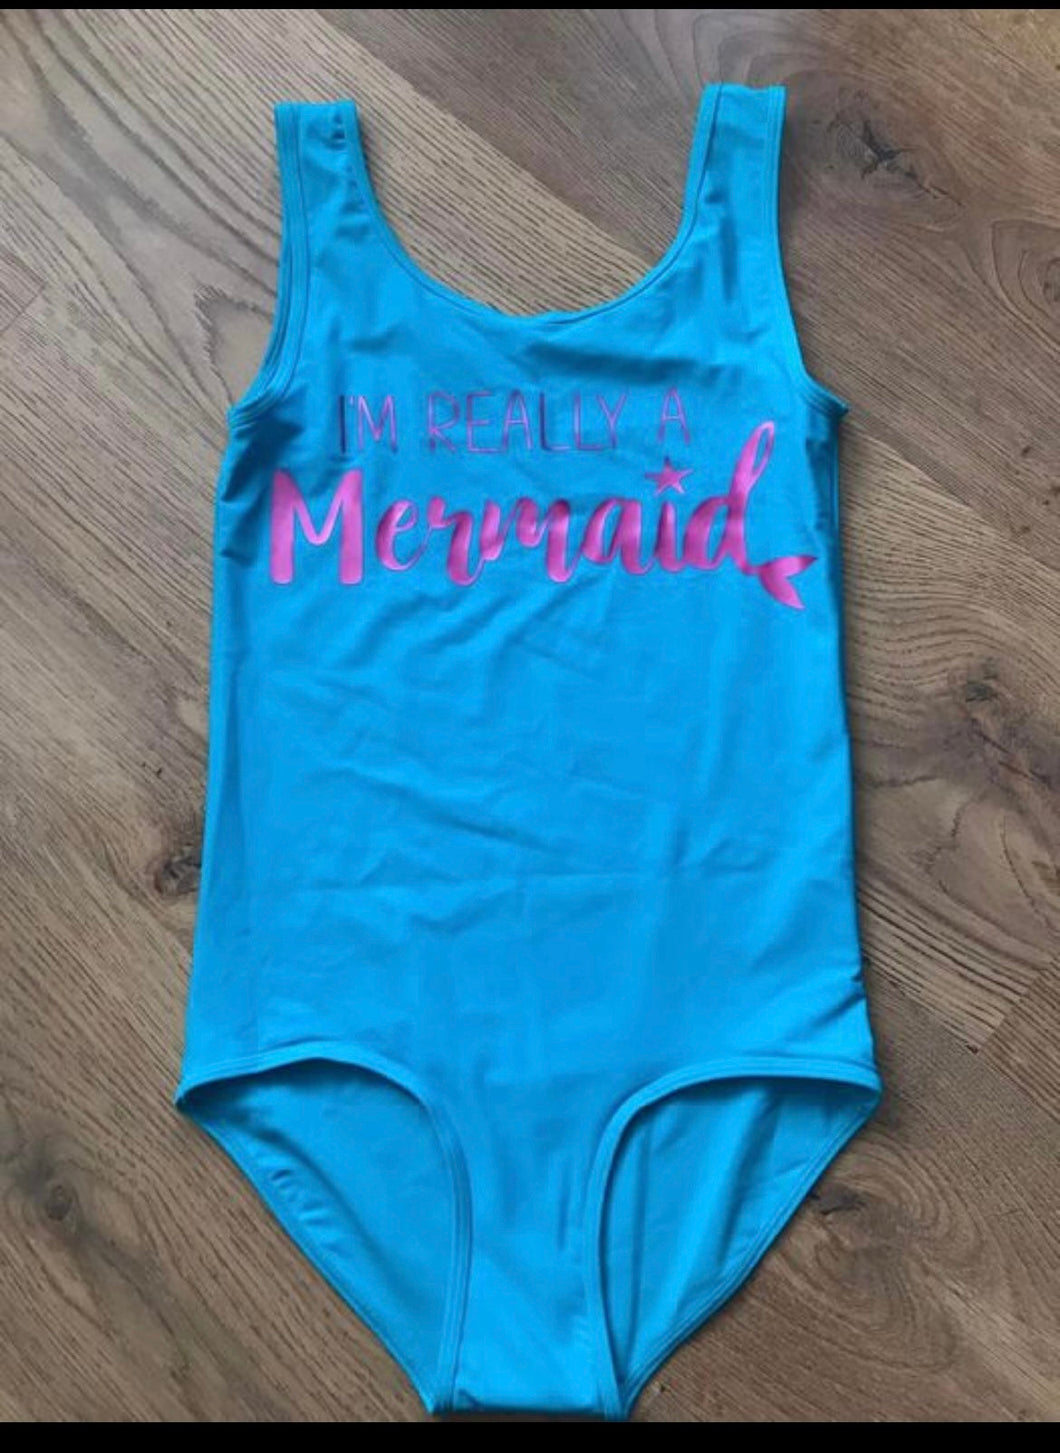 ‘I’m really a mermaid’ swimsuit